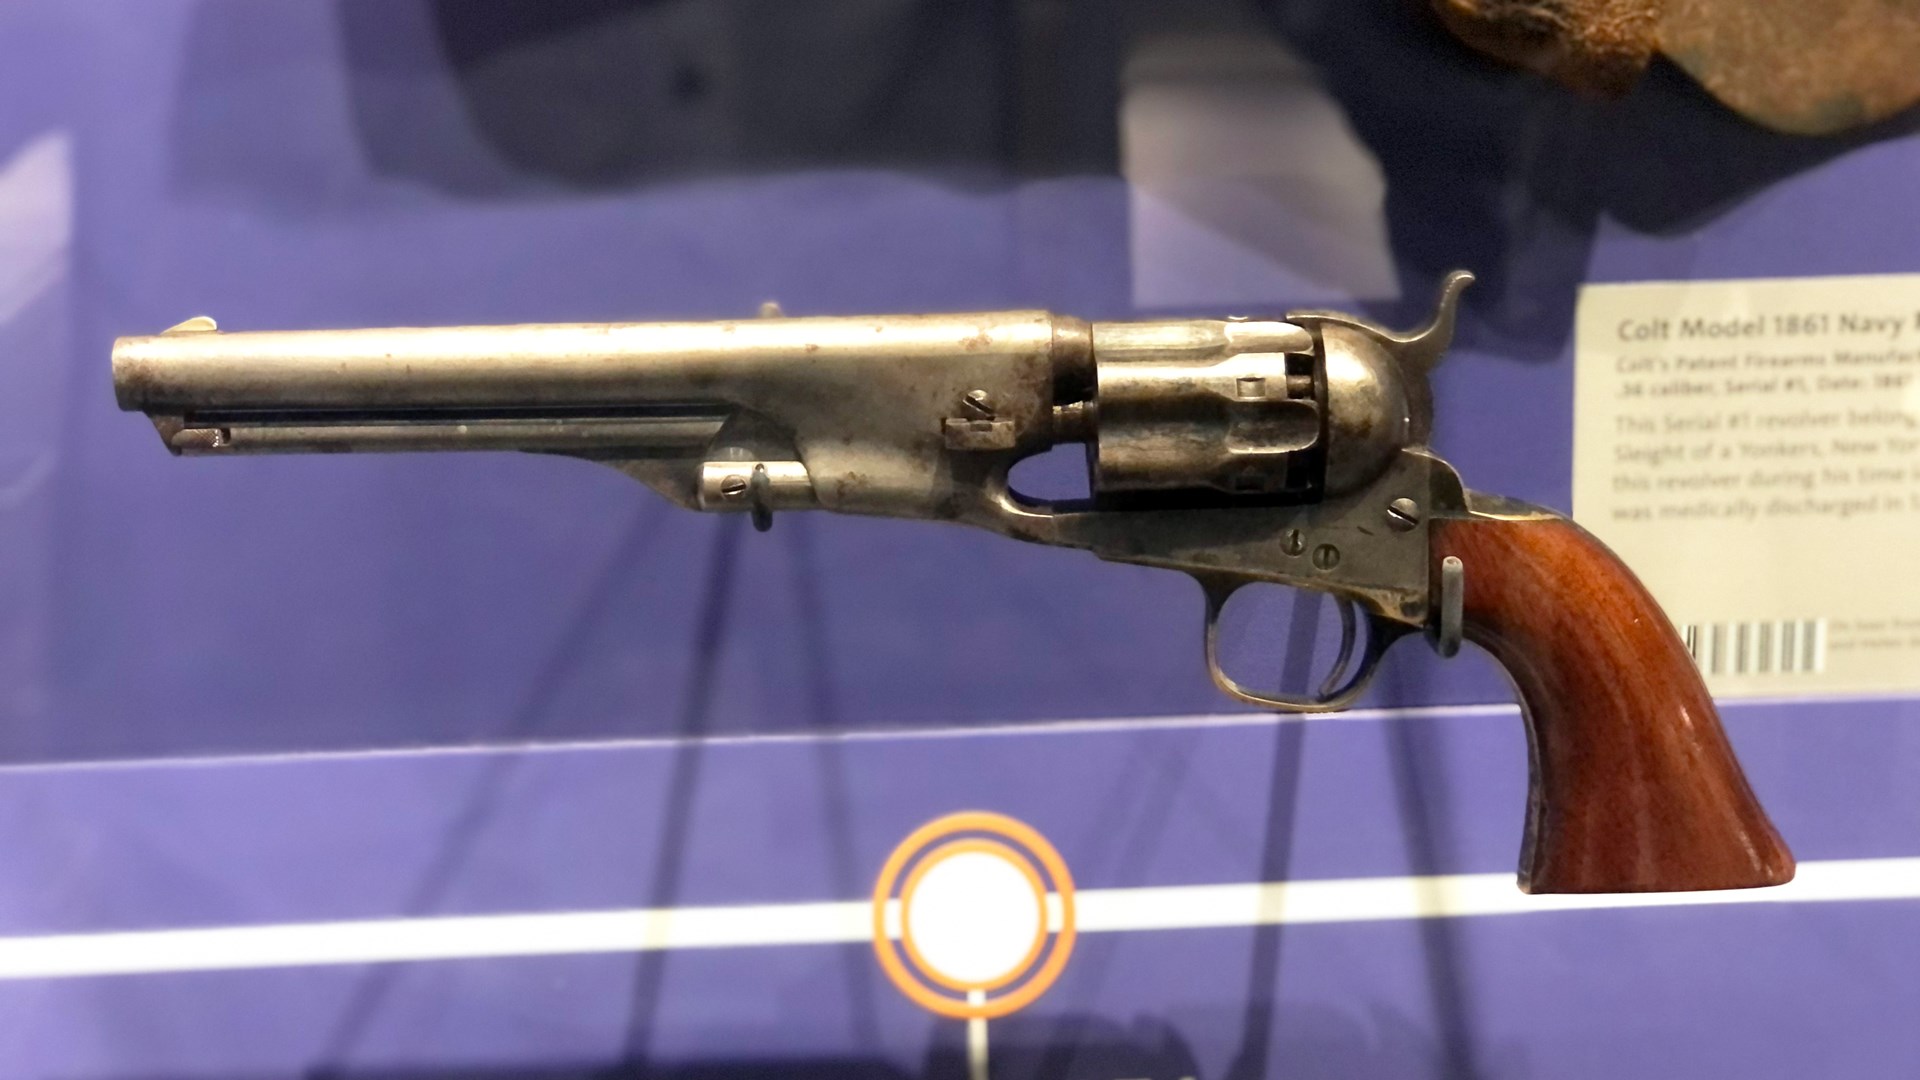 Colt 1851 Navy revolver serial number 1 cody firearms museum display